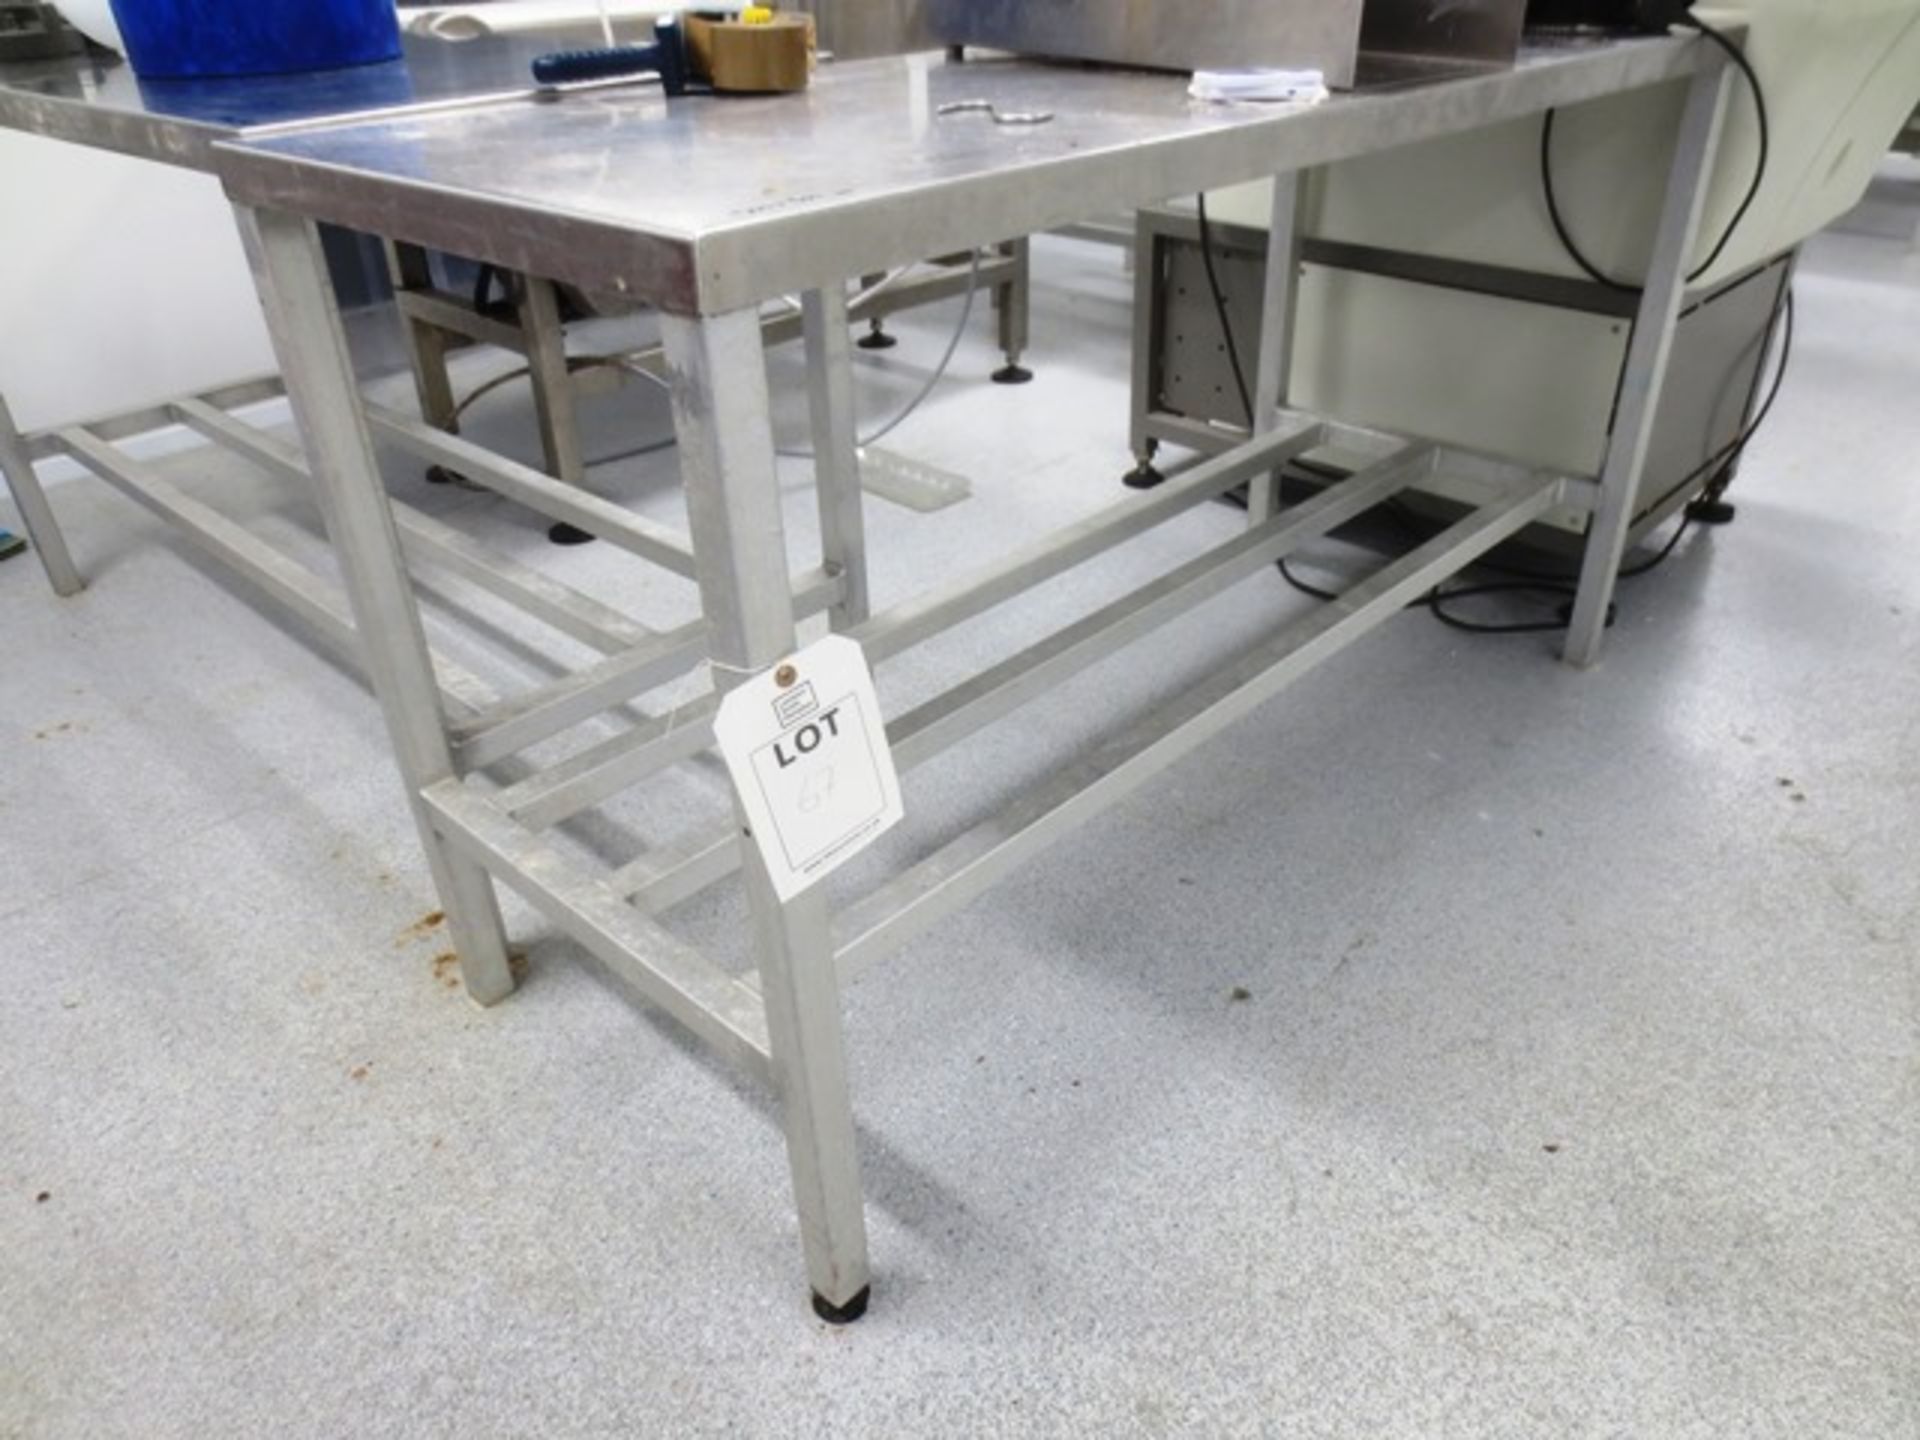 Stainless steel prep table with upstand, approx 1500 x 600mm (please note: excludes all contents)